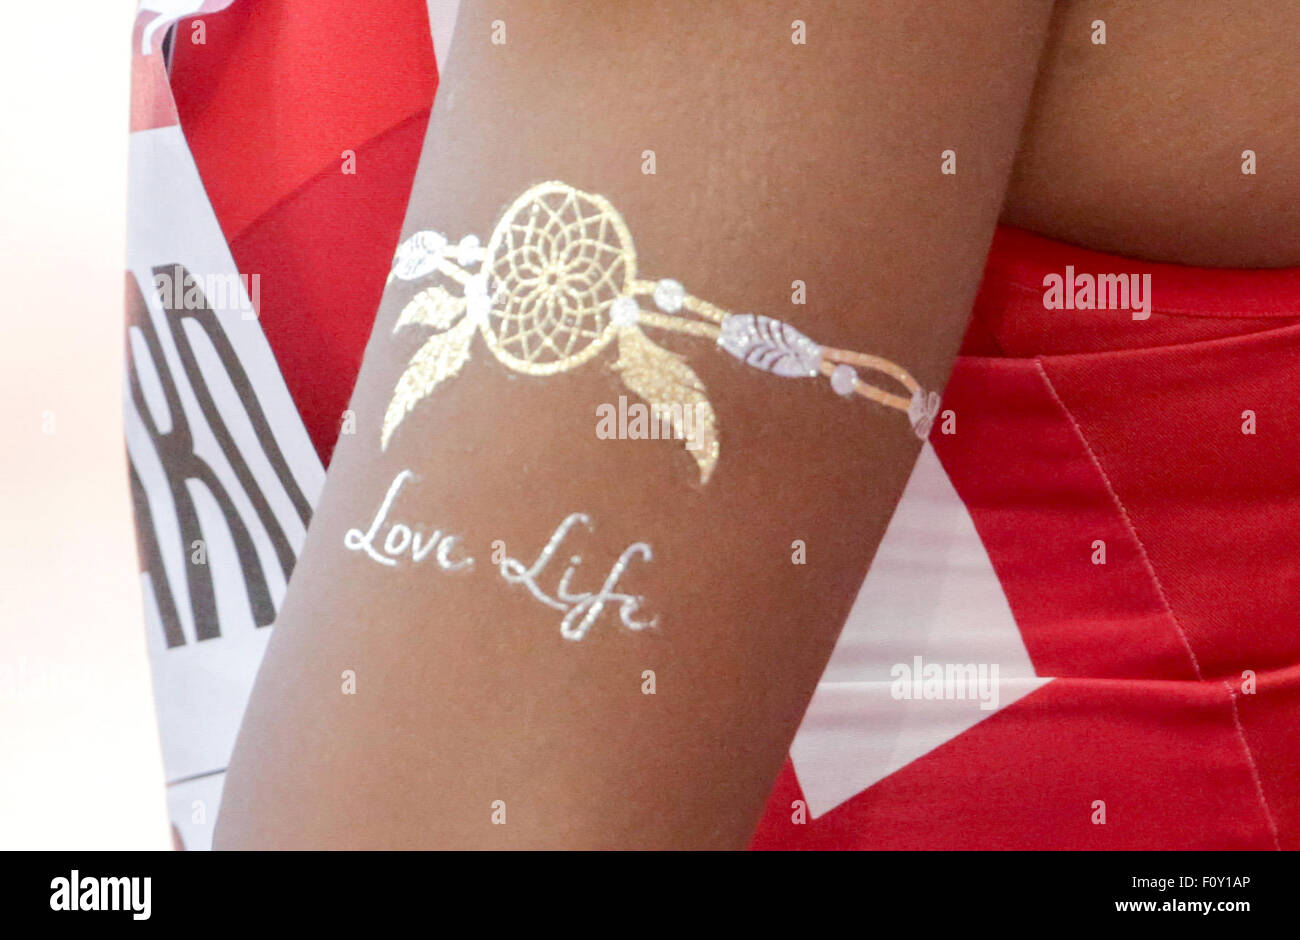 Beijing, China. 22nd Aug, 2015. A skin painting that reads 'Love Life' is seen on the arm of Erica Bougard of the US in the high jump section of the Heptathlon competition during the 15th International Association of Athletics Federations (IAAF) Athletics World Championships in Beijing, China, 22 August 2015. Photo: Michael Kappeler/dpa/Alamy Live News Stock Photo